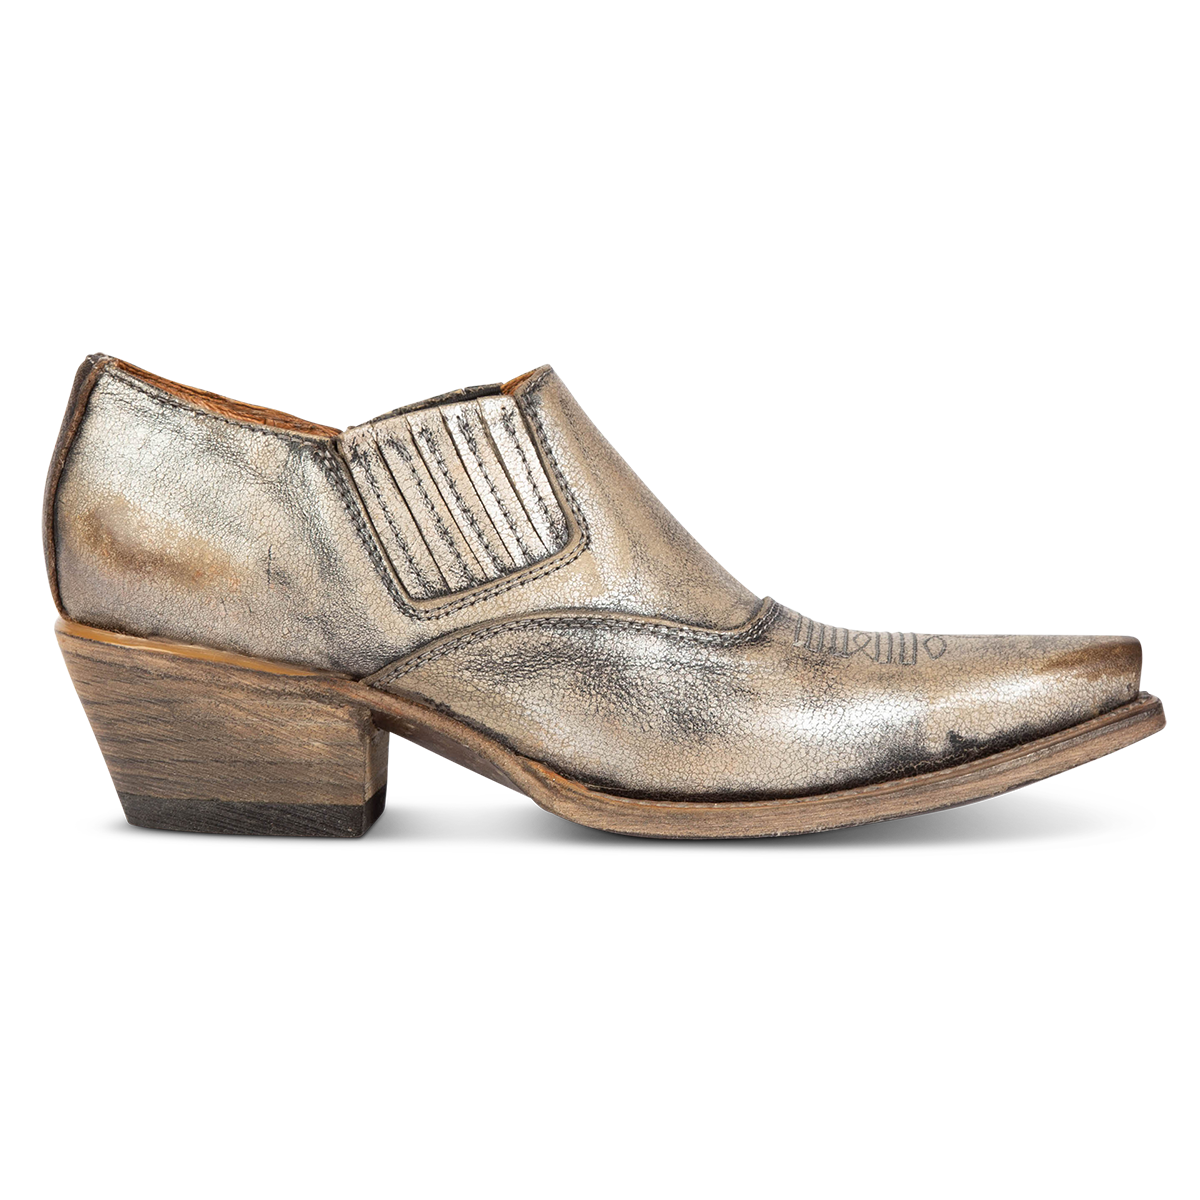 FREEBIRD women's Wyoming pewter featuring gore, western stitch detailing and snip toe